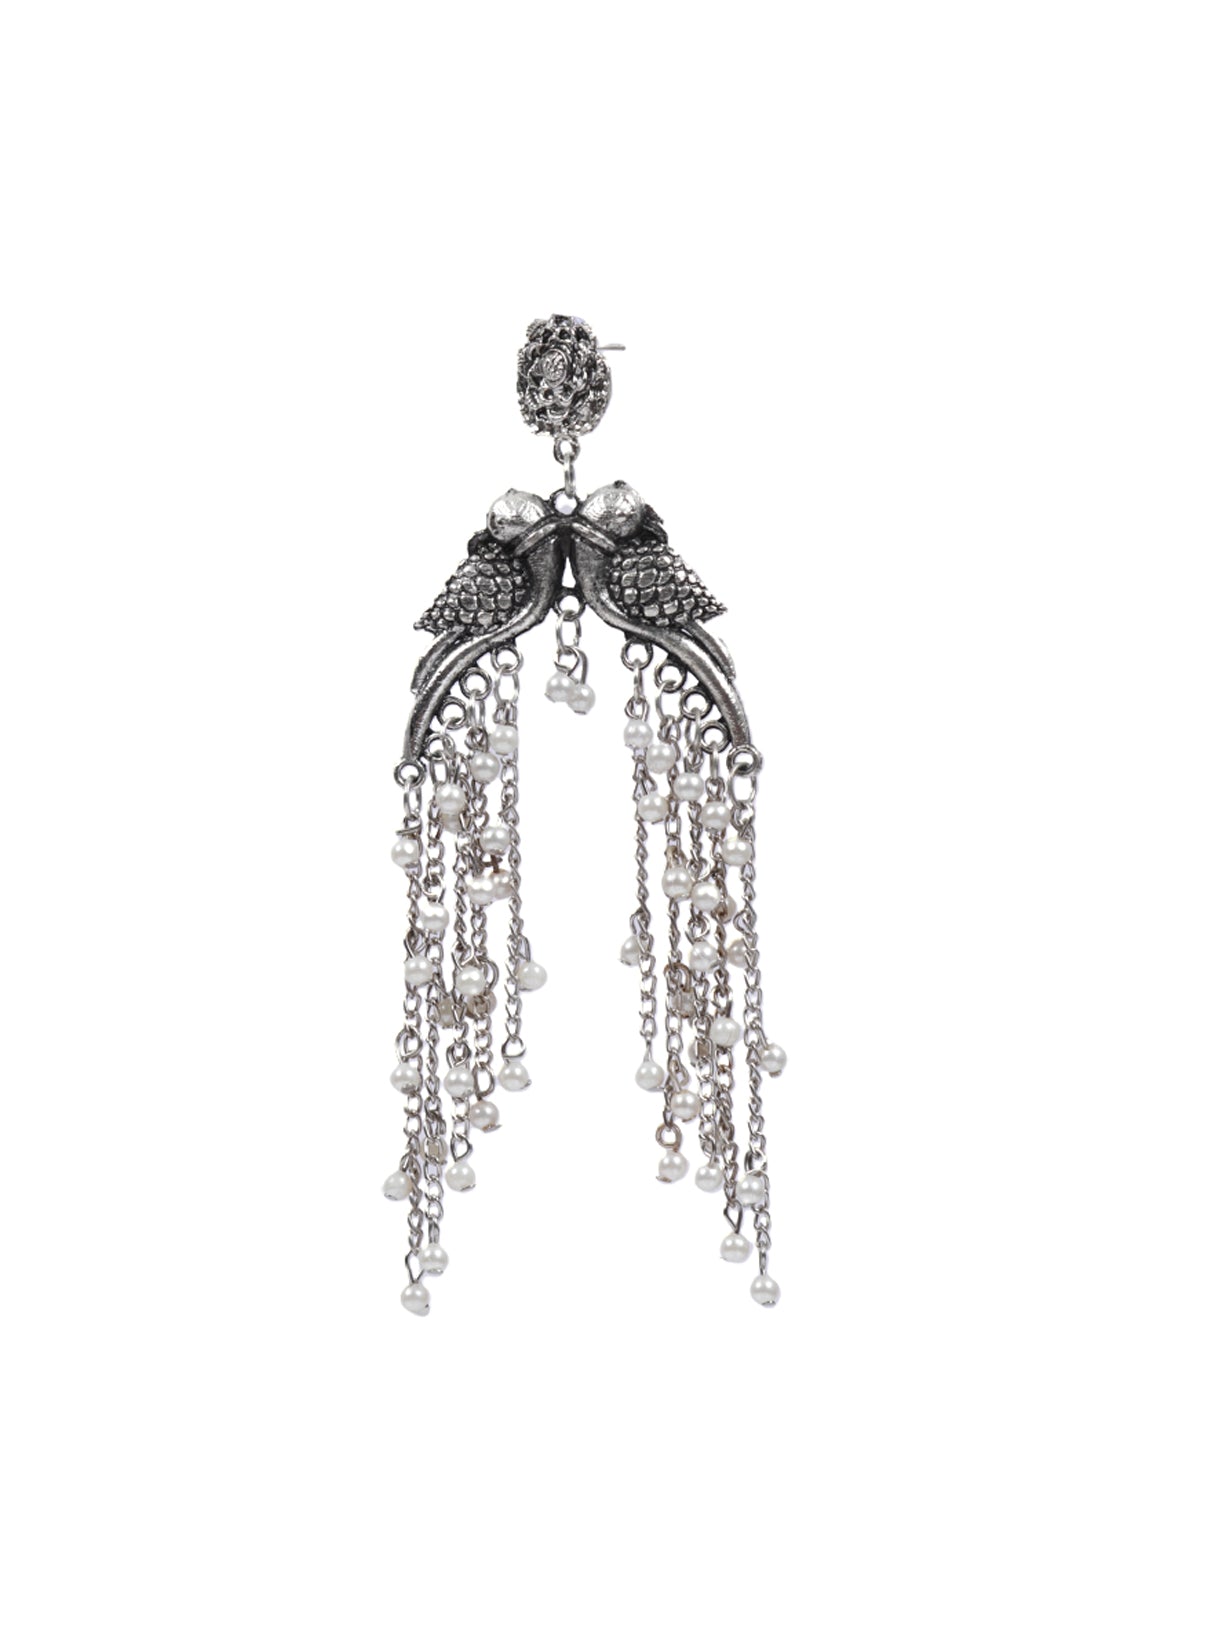 Intricately Crafted Long Peacock Earrings with White Beads